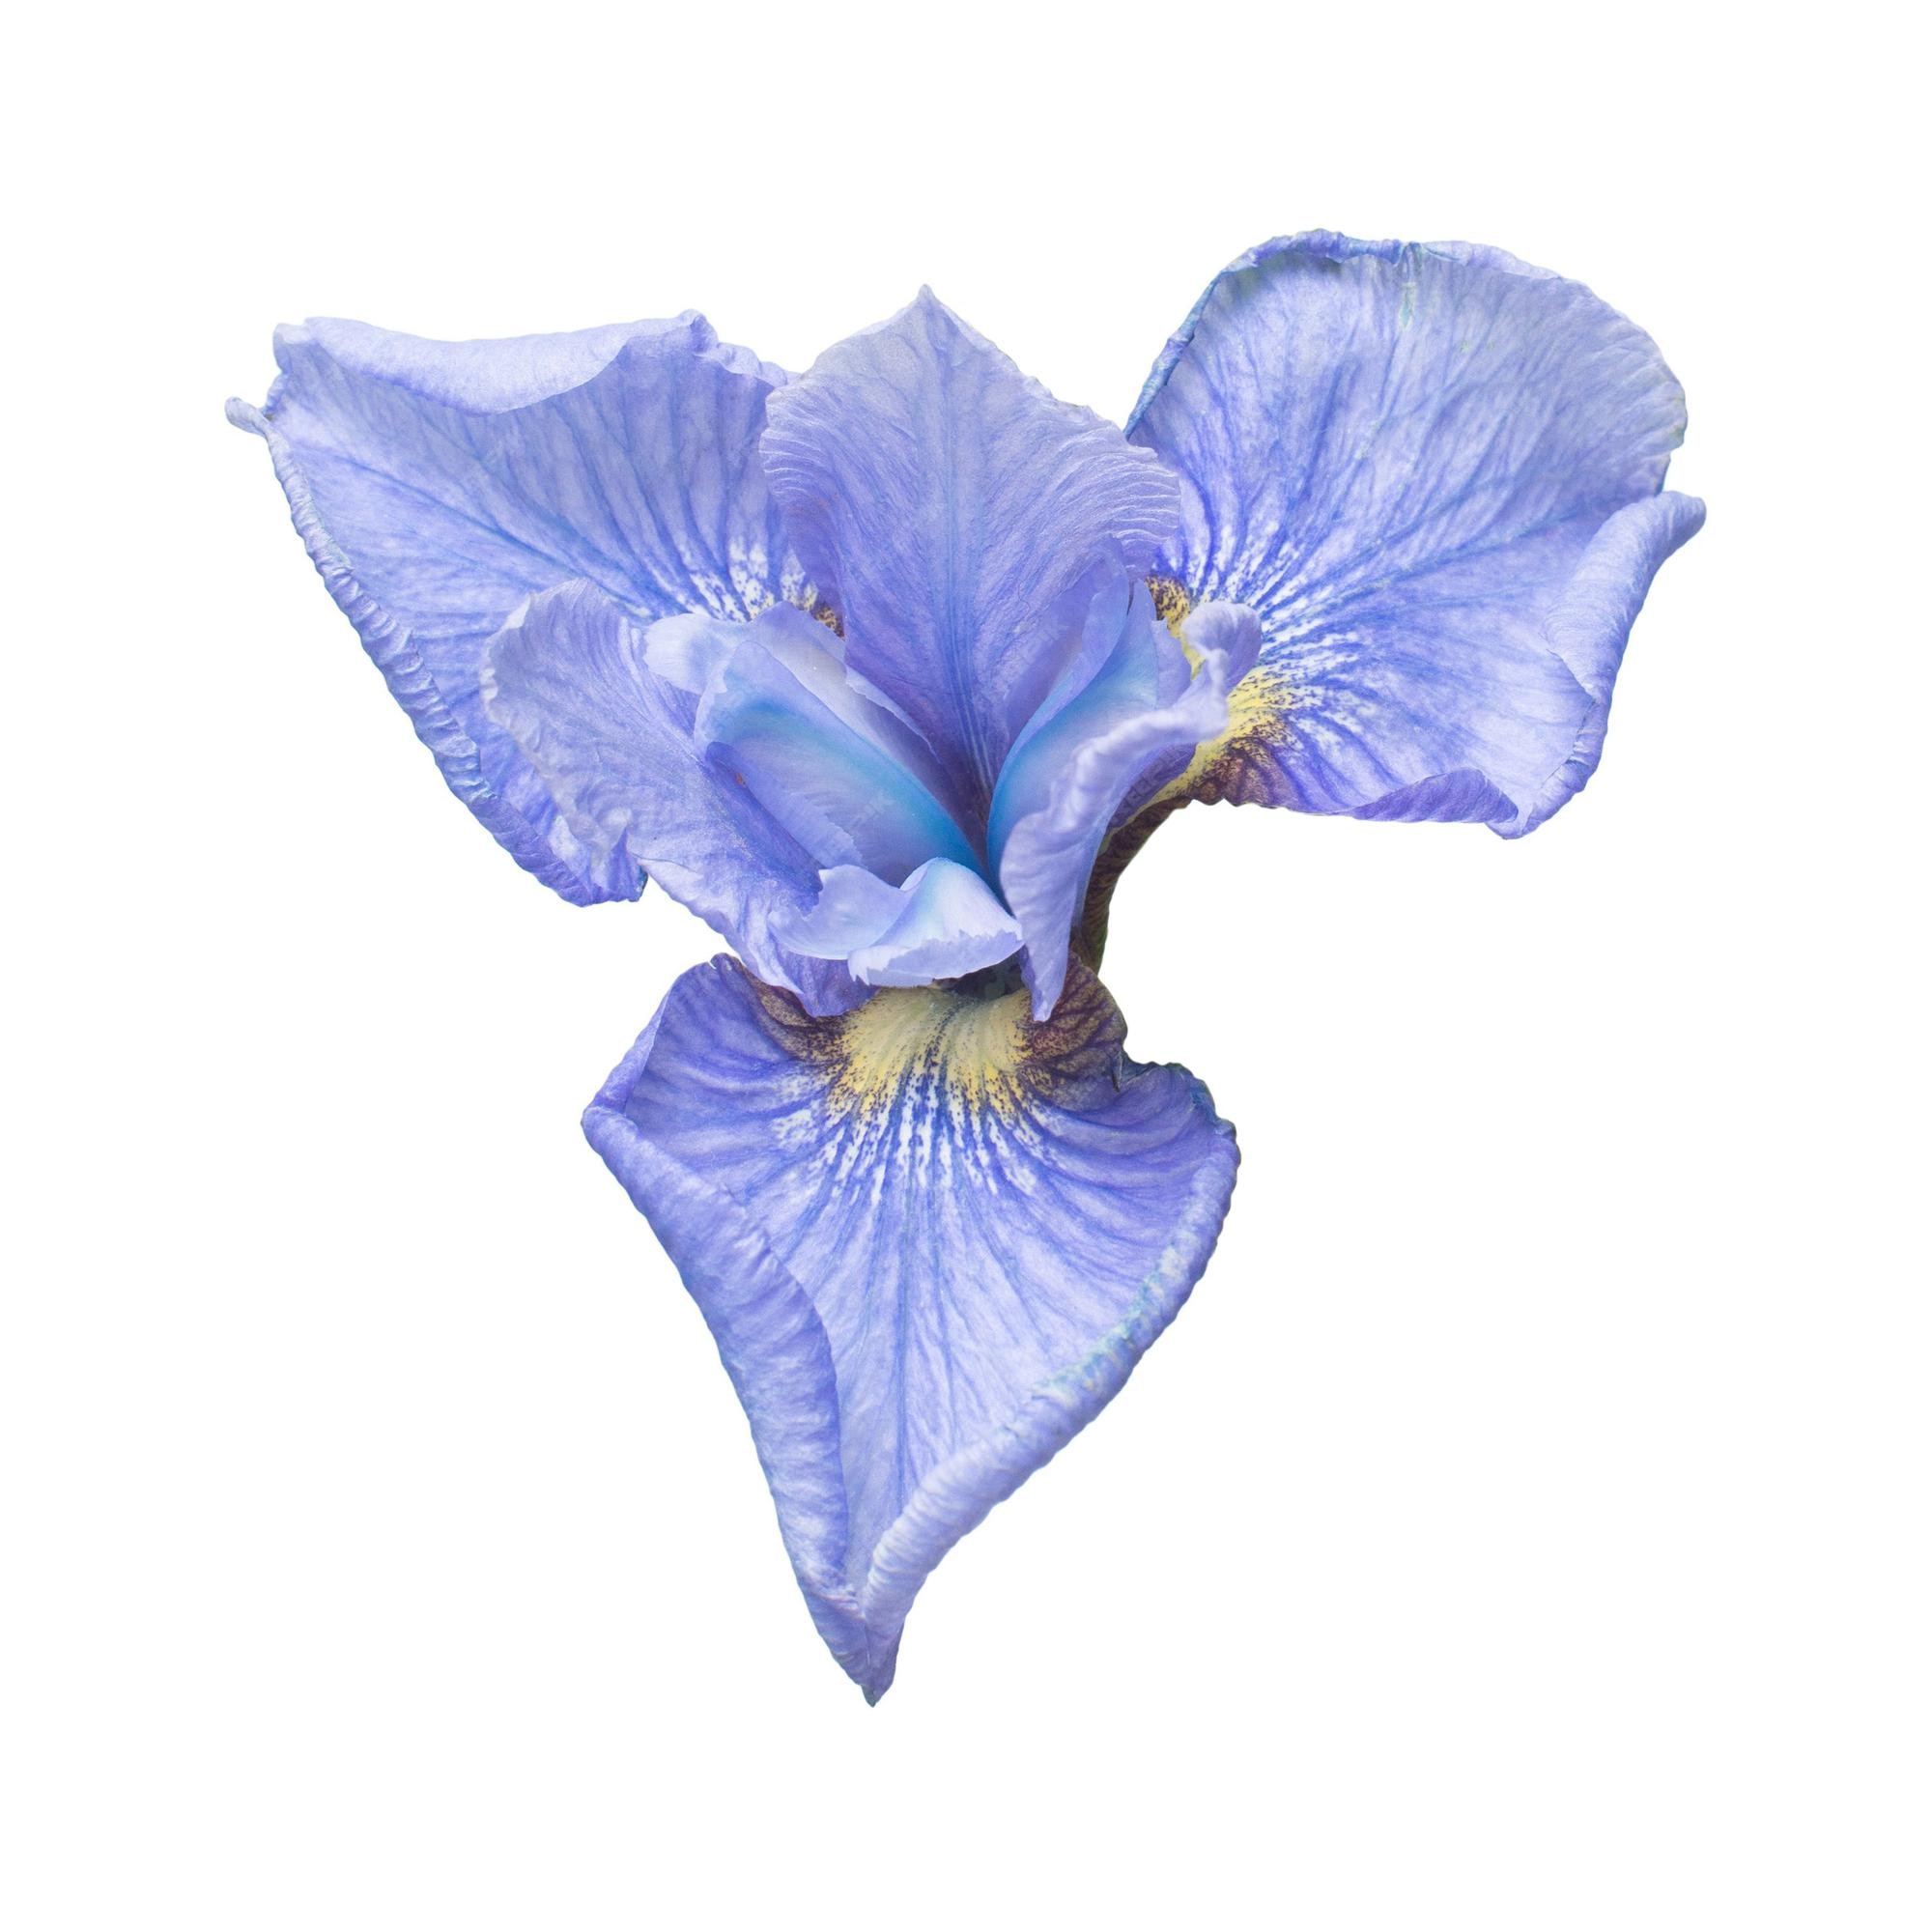 Premium Photo   Beautiful blue iris flower with bud, branches and ...